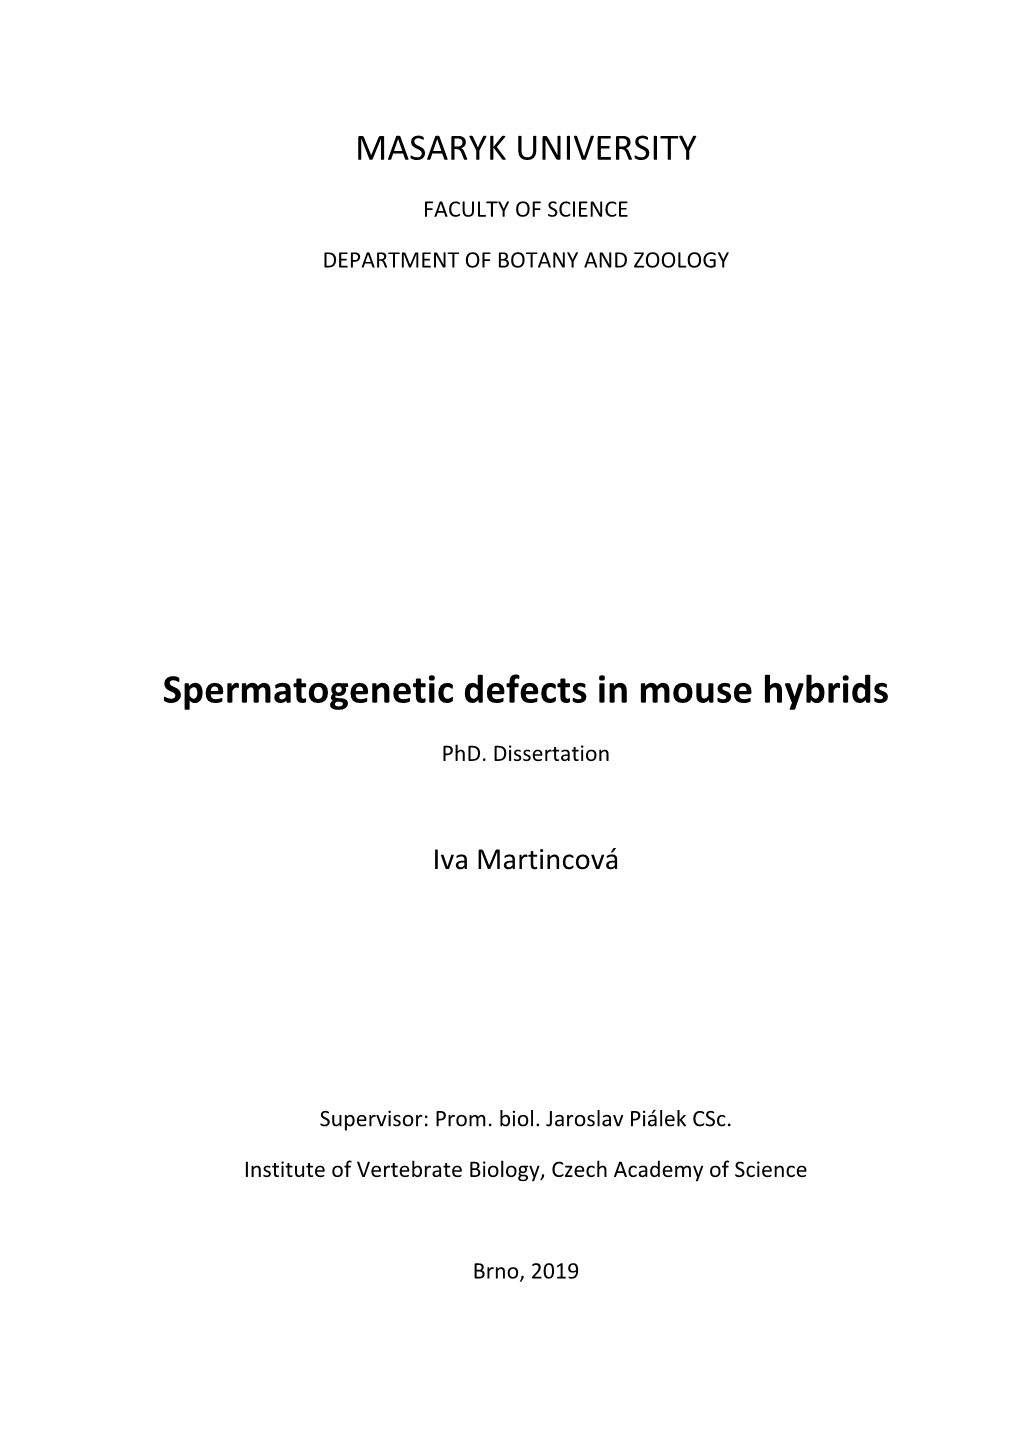 Spermatogenetic Defects in Mouse Hybrids